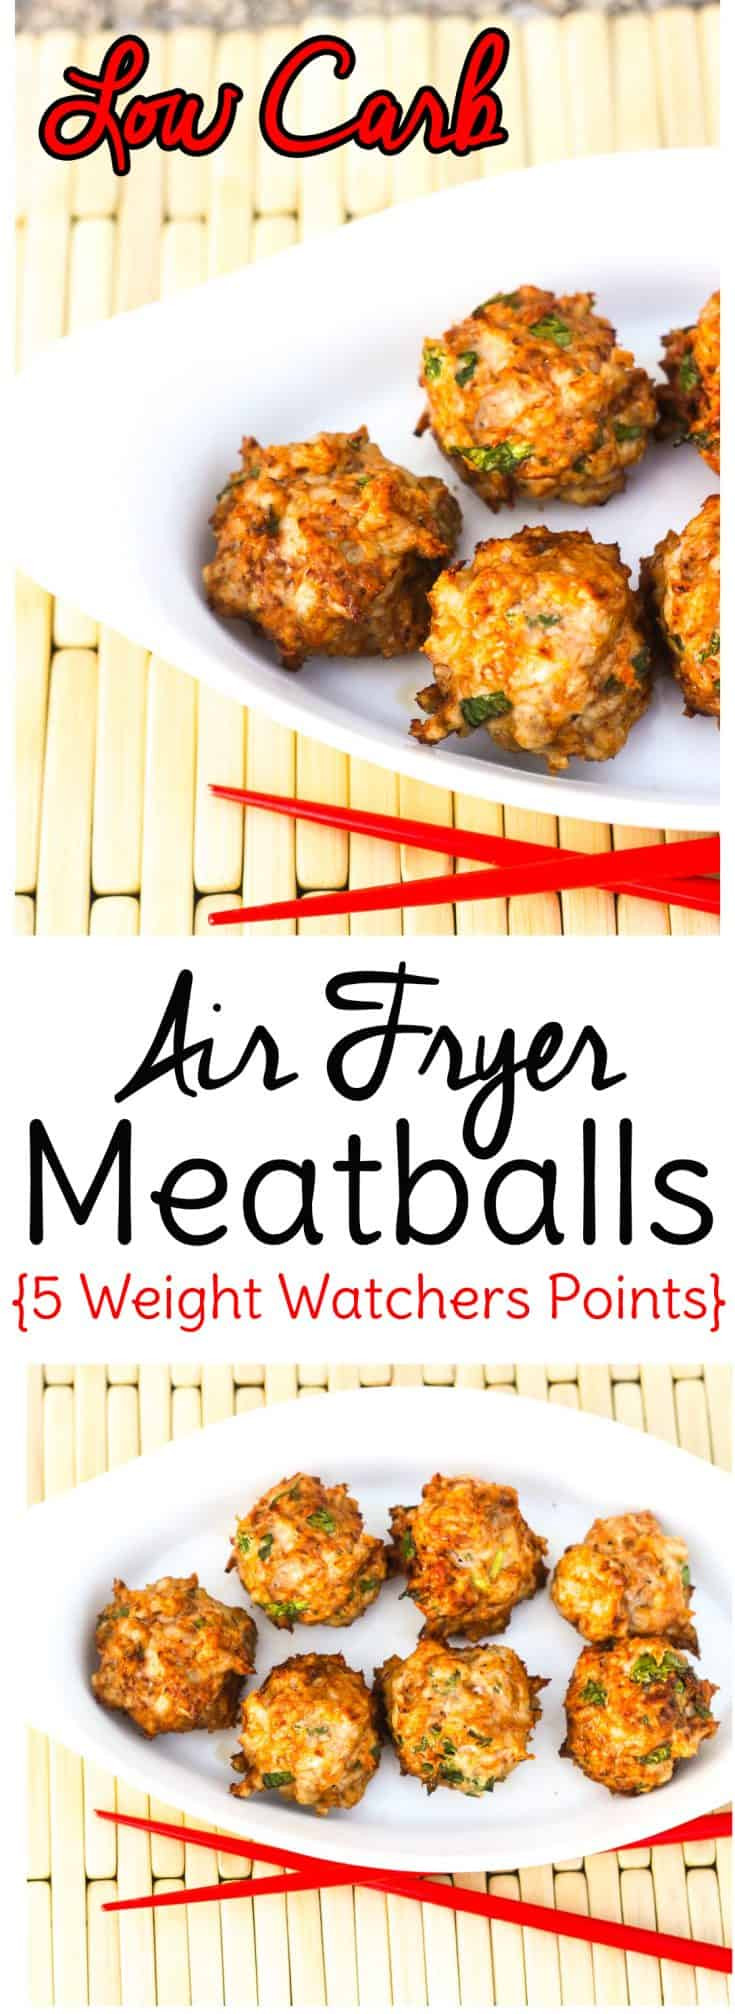 Air Fryer Low Carb Recipes
 Low Carb Meatballs in the Airfryer 5 Weight Watchers Points